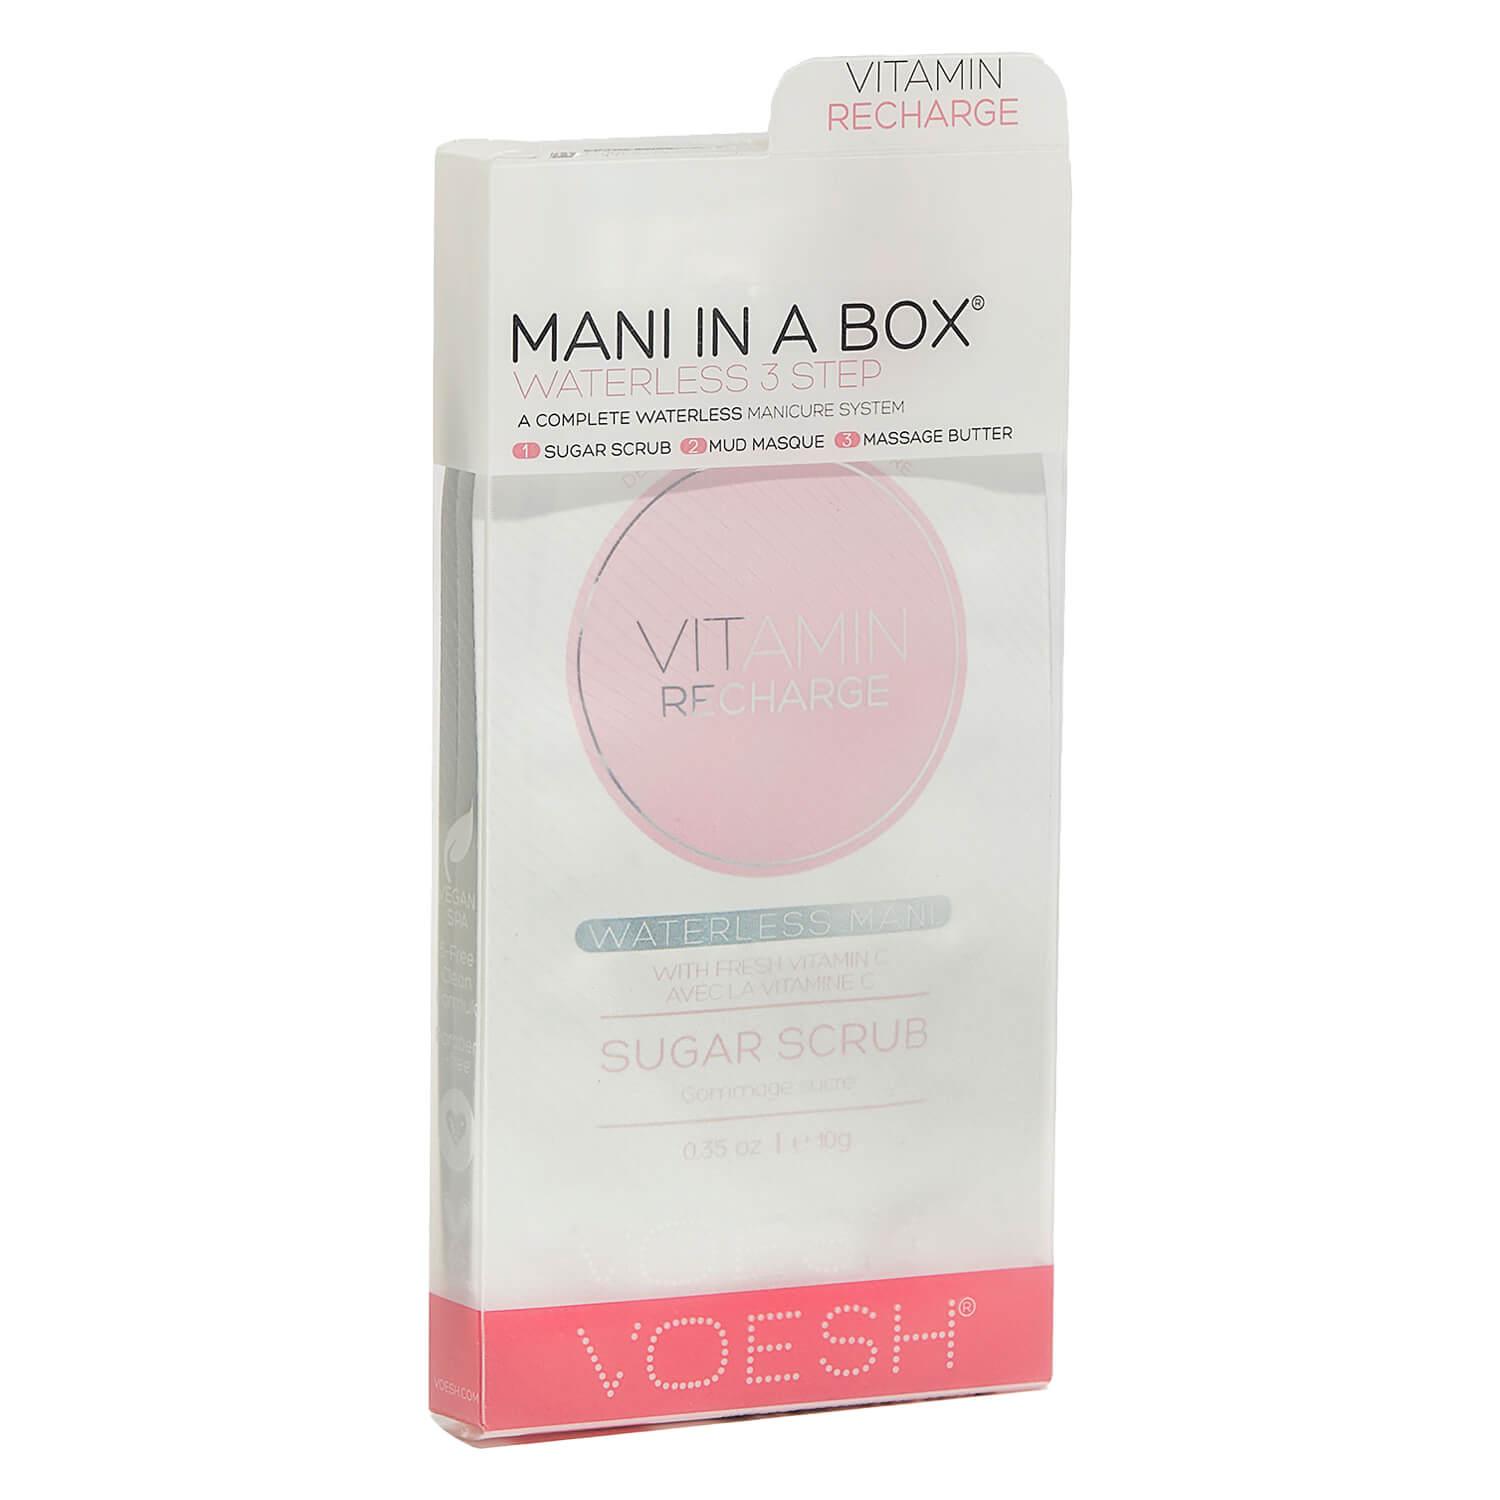 VOESH New York - Mani In A Box 3 Step Vitamin Recharge